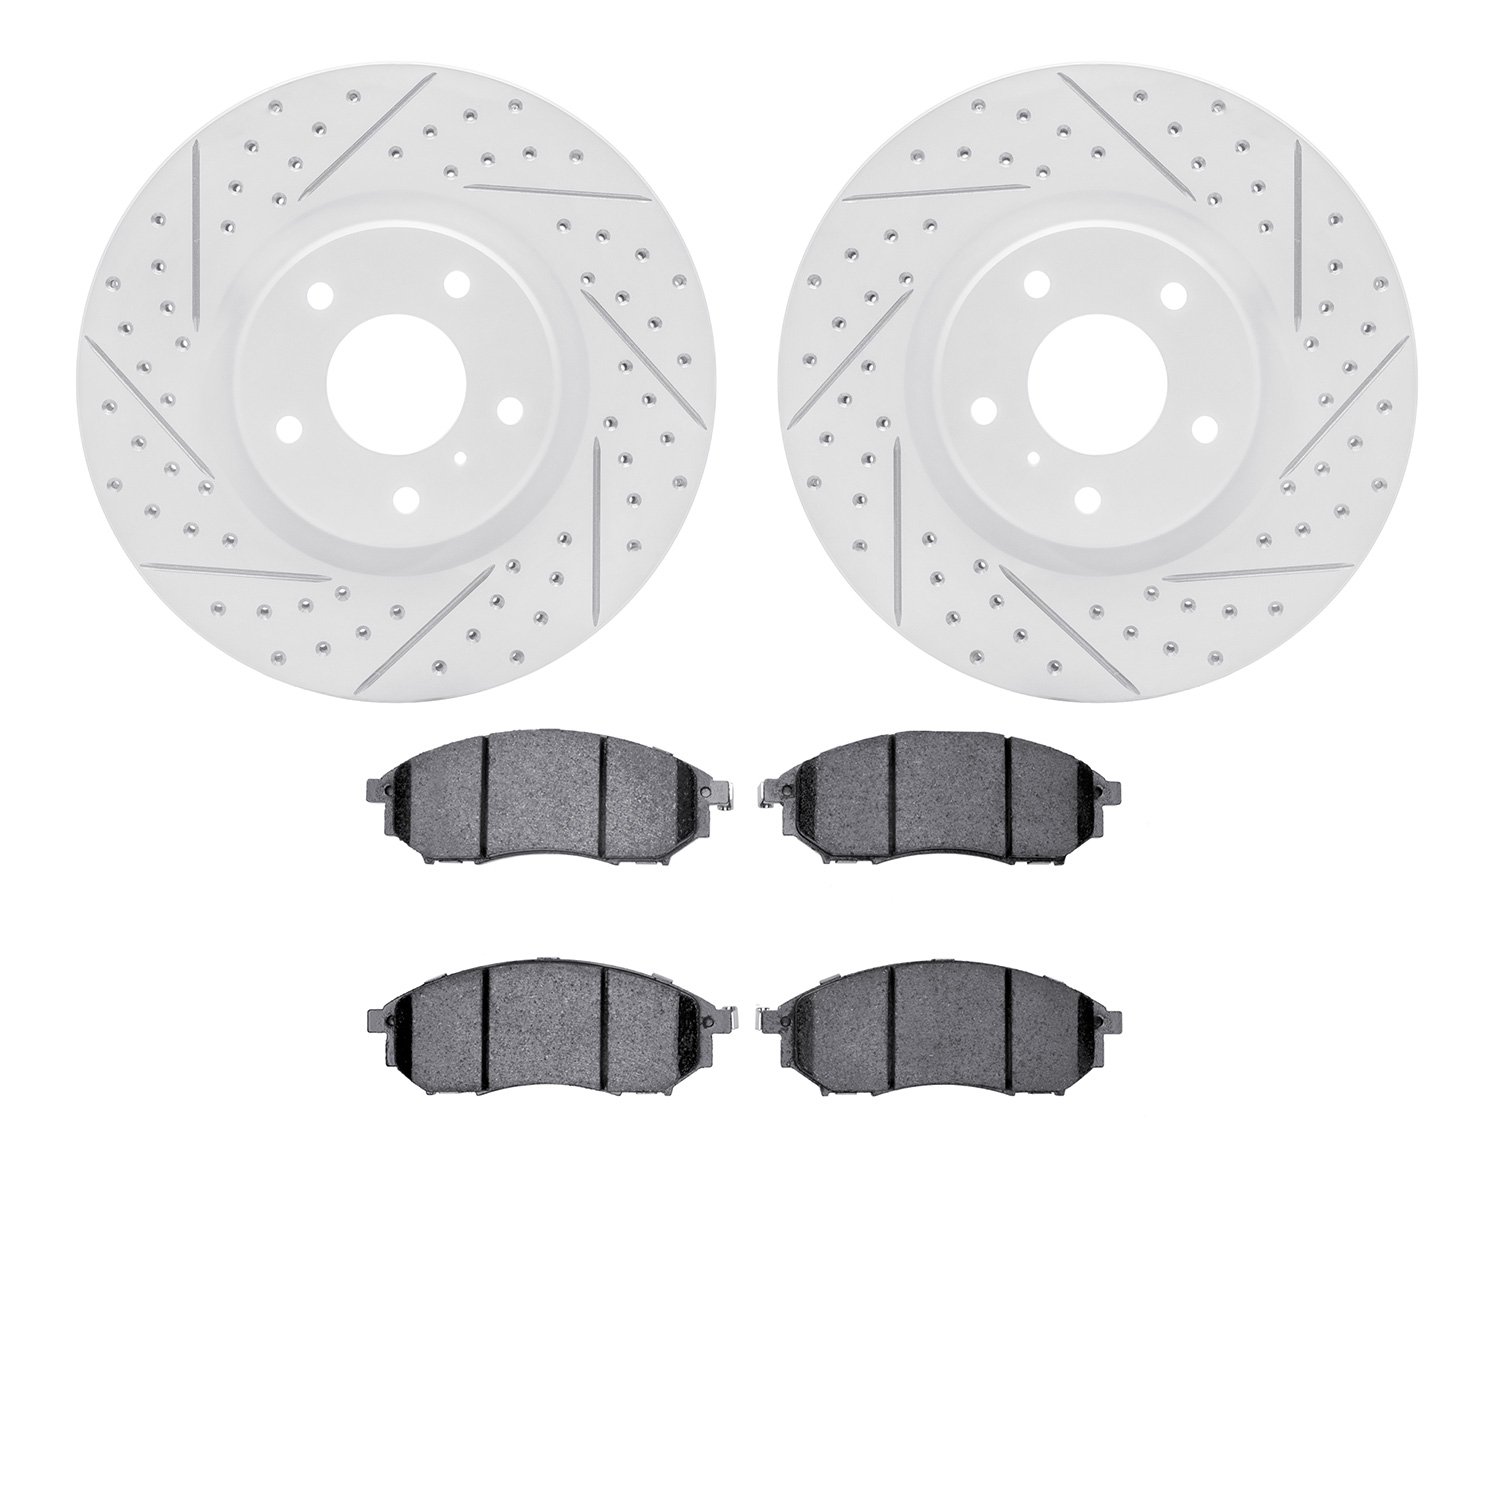 2502-67018 Geoperformance Drilled/Slotted Rotors w/5000 Advanced Brake Pads Kit, 2006-2020 Infiniti/Nissan, Position: Front